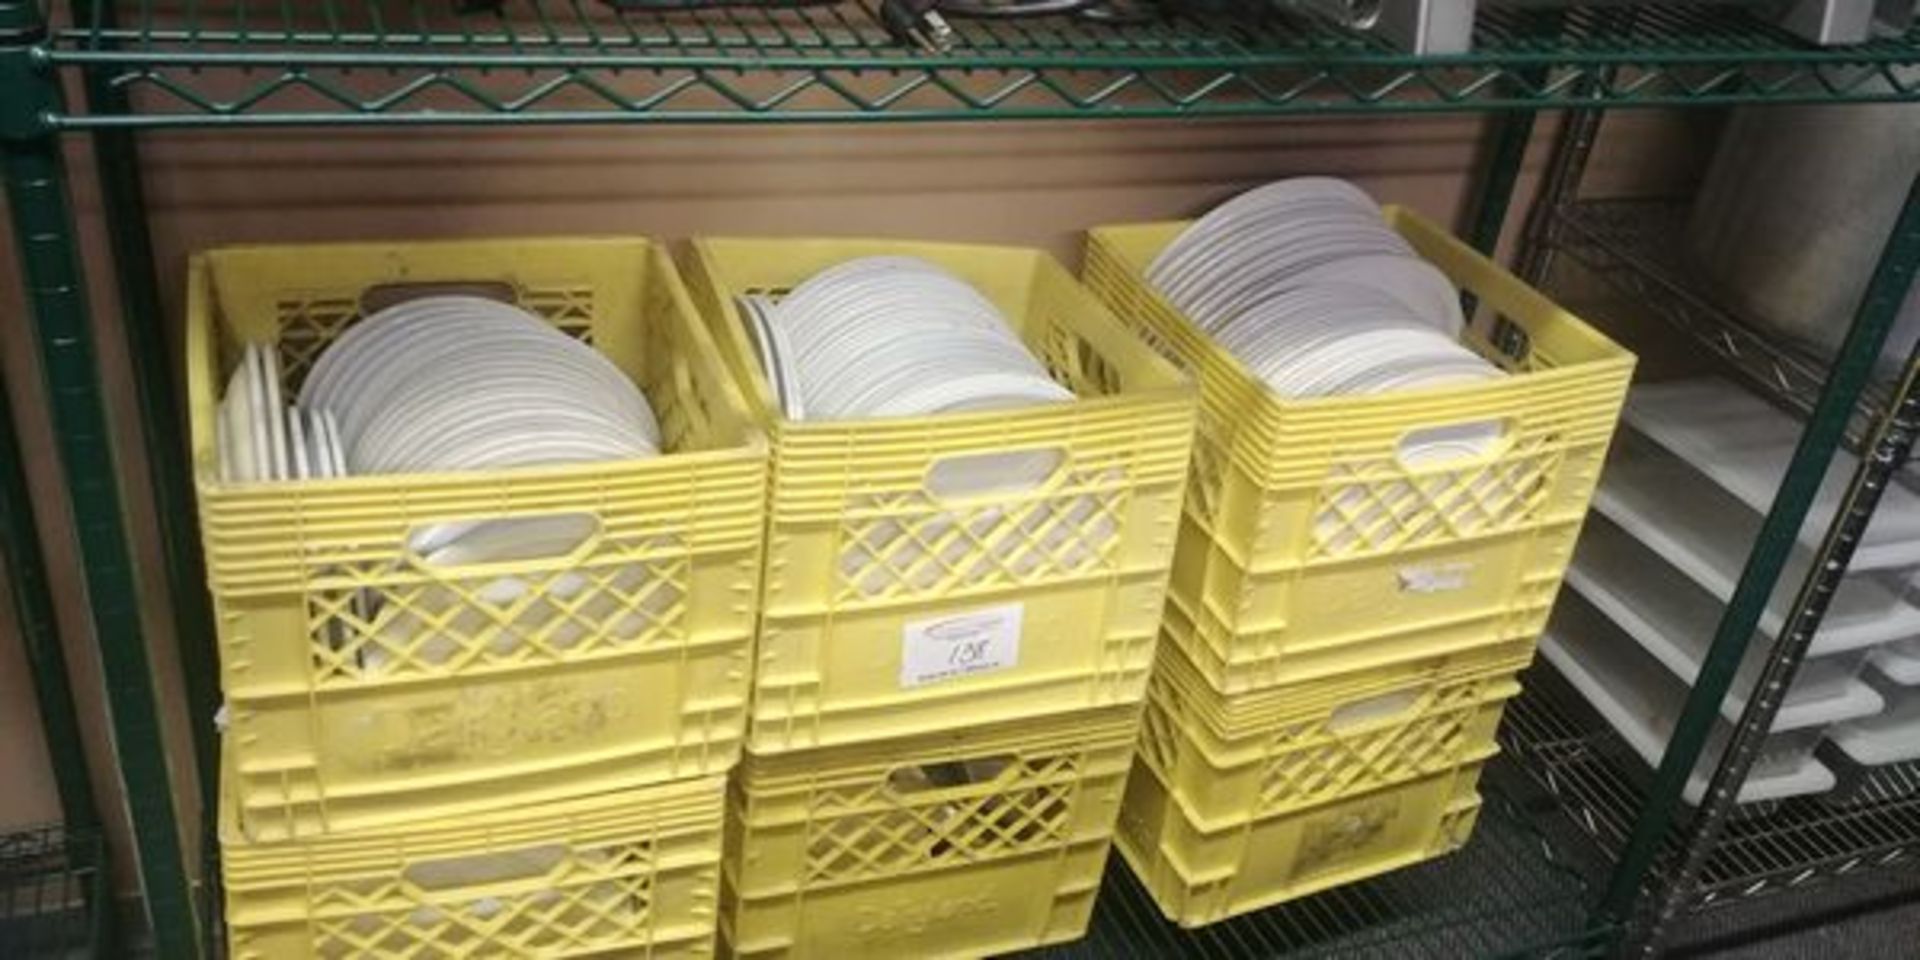 6 Crates of Heavy White Dishes - World Brand